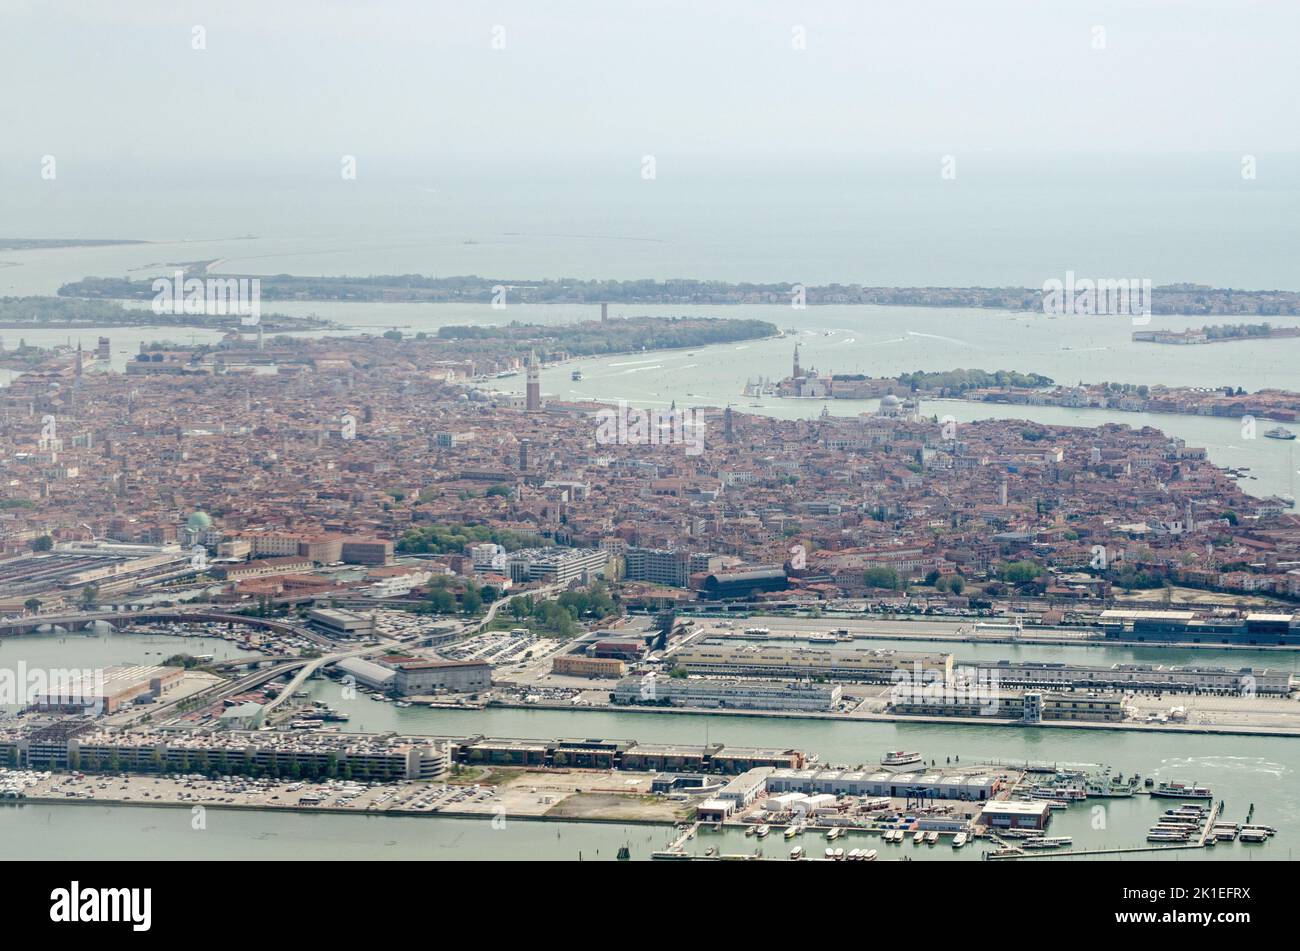 View from a plane approaching Marco Polo airport looking across the historic centre of Venice with the cruise terminal and Tronchetto transport facili Stock Photo